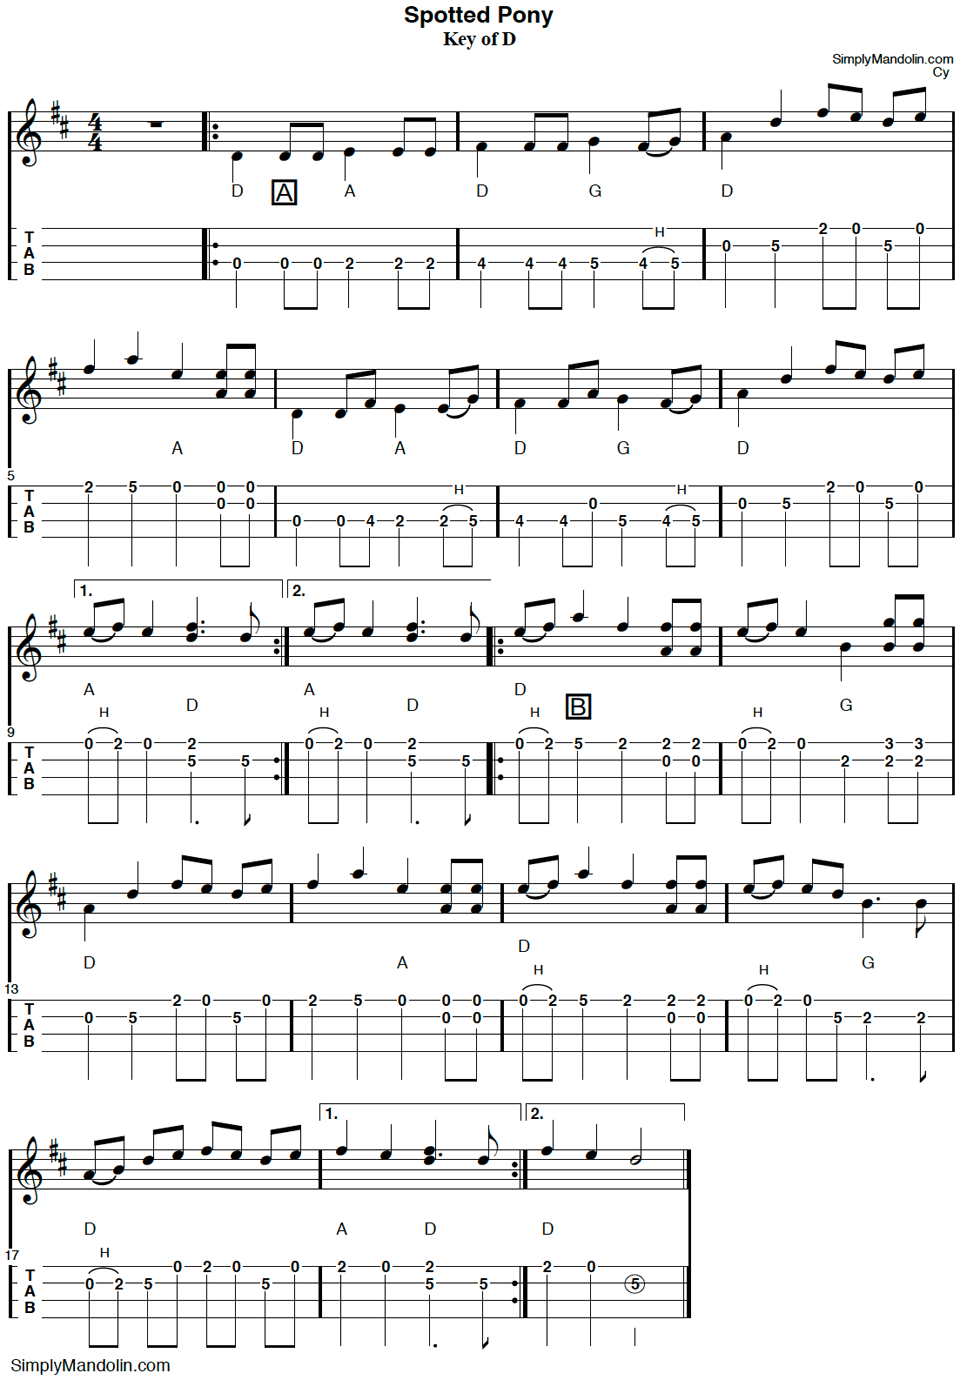 image of tablature for the tune "spotted pony".